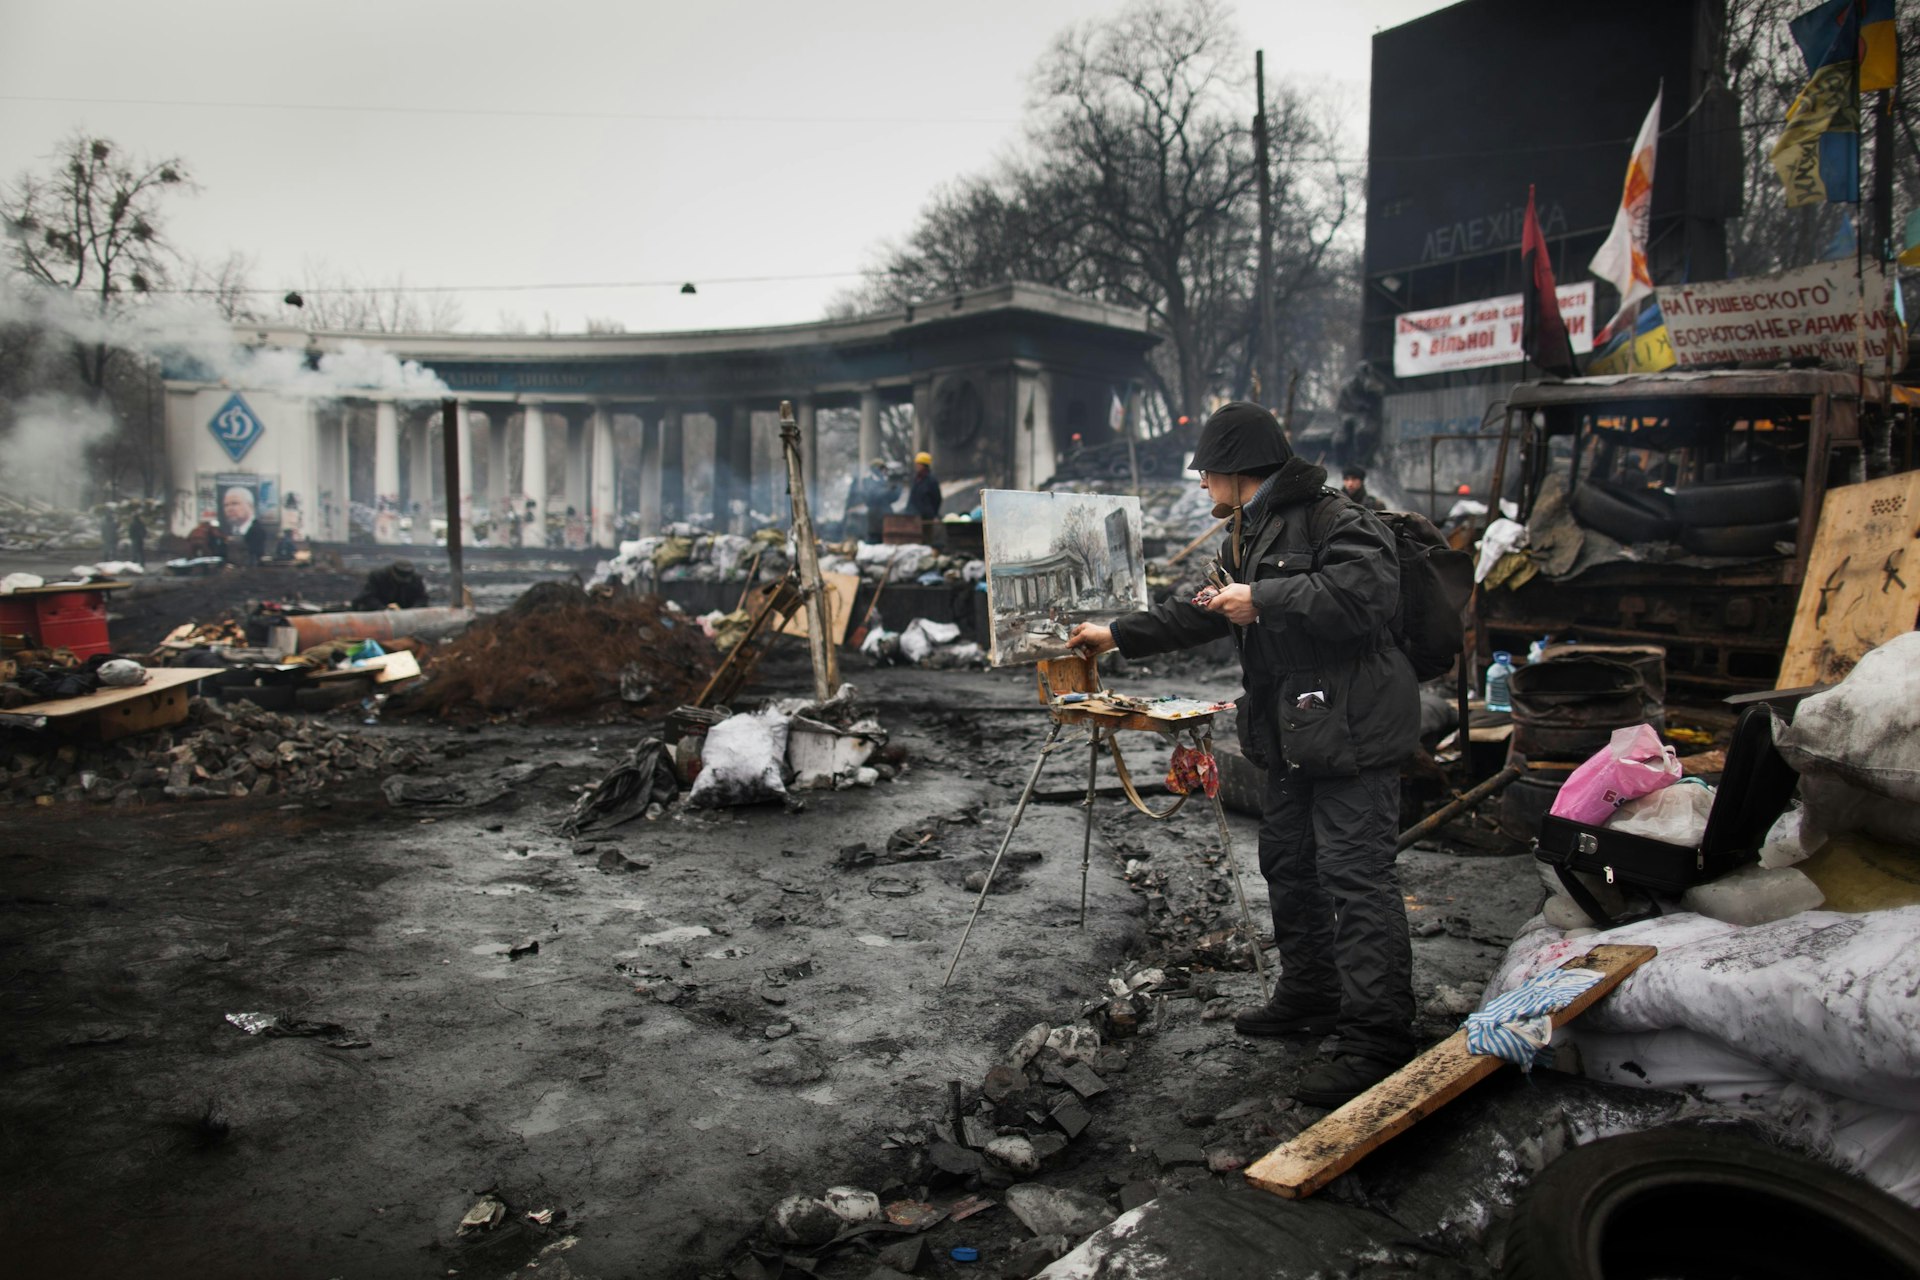 An artist paints during Ukraine’s Maidan protests, February 2014.